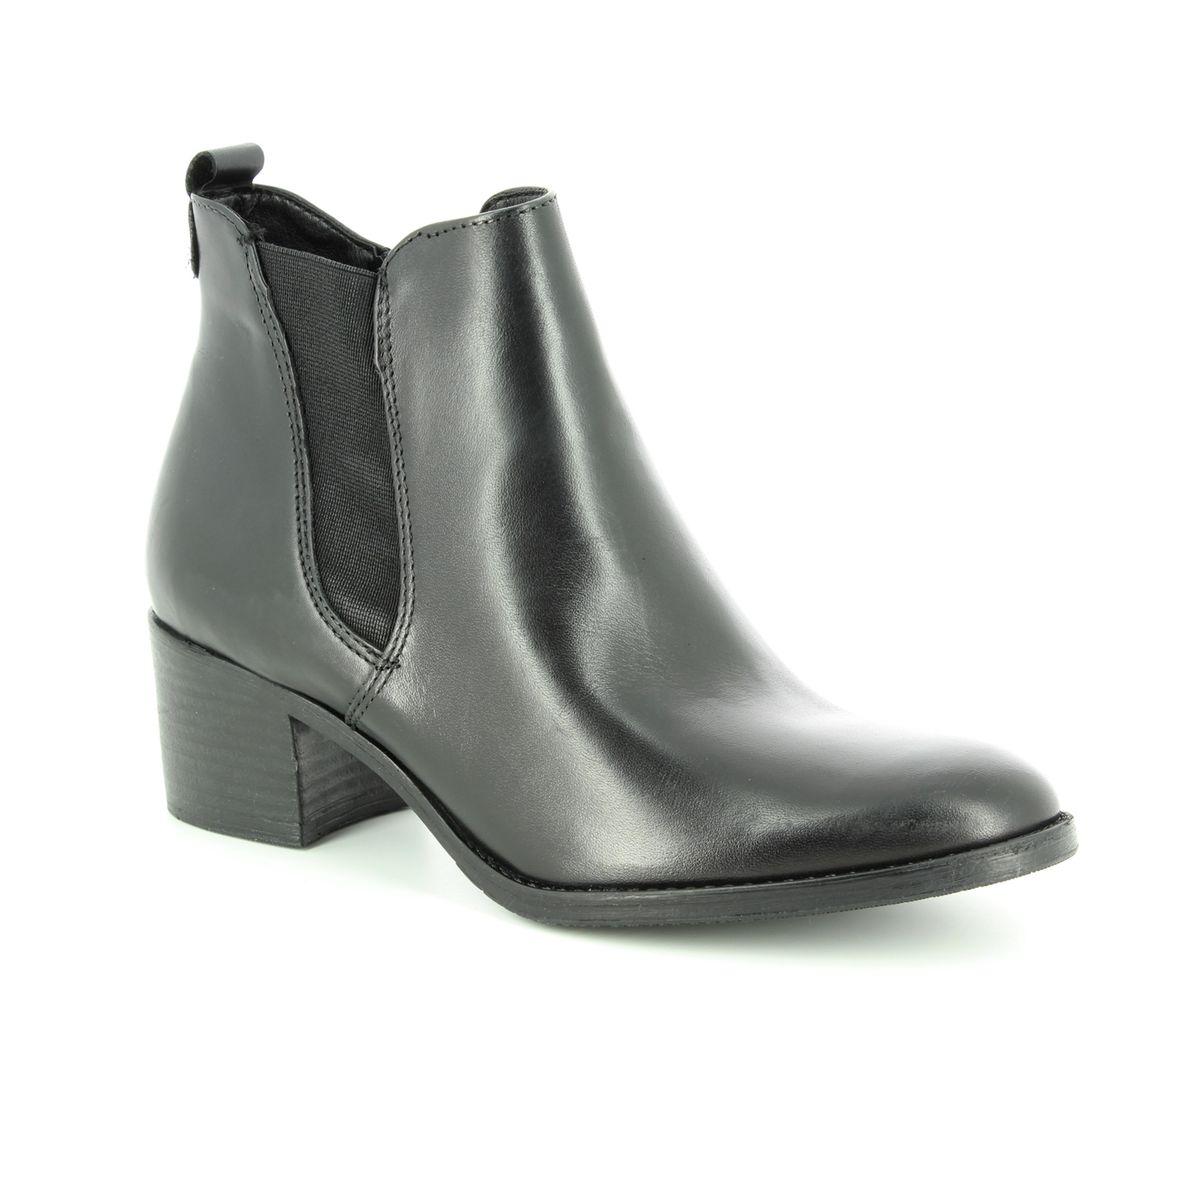 25043-21-001 Black leather ankle boots